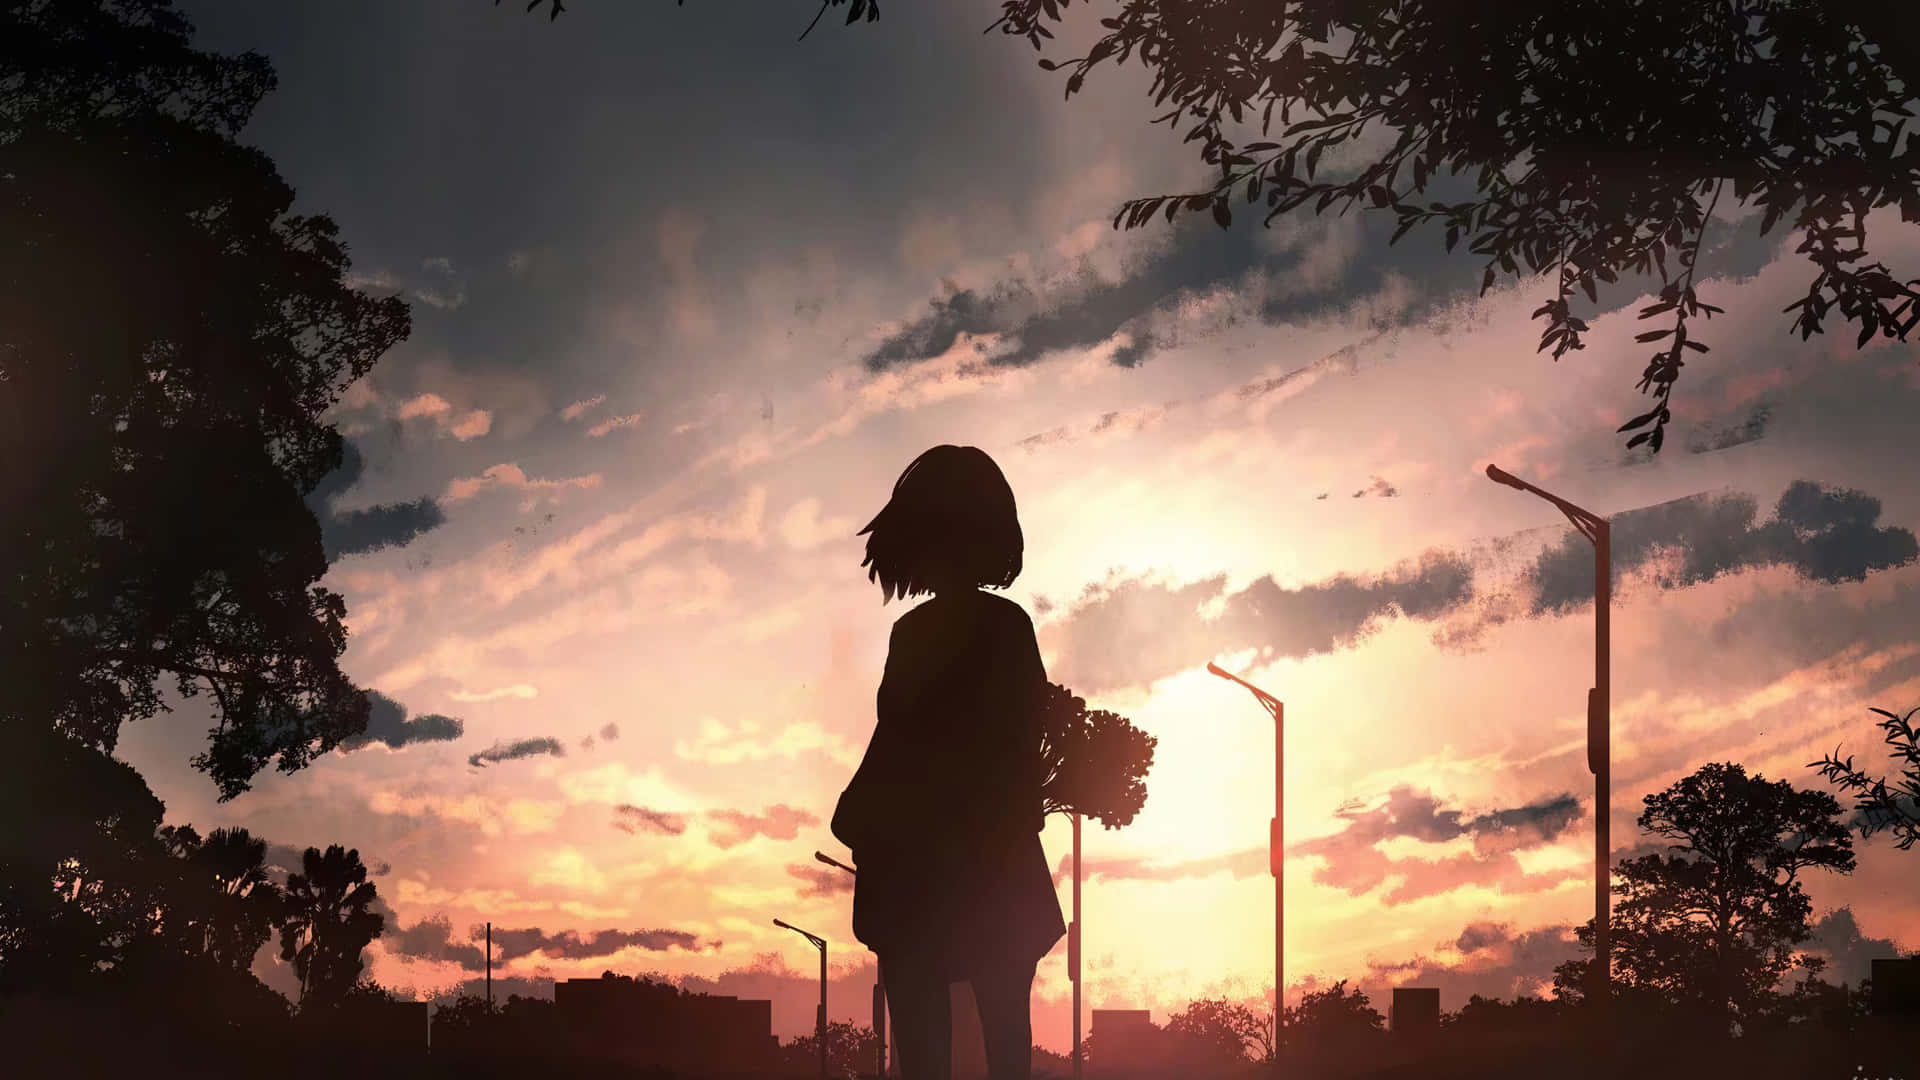 Anime Sunset With Girl Silhouette